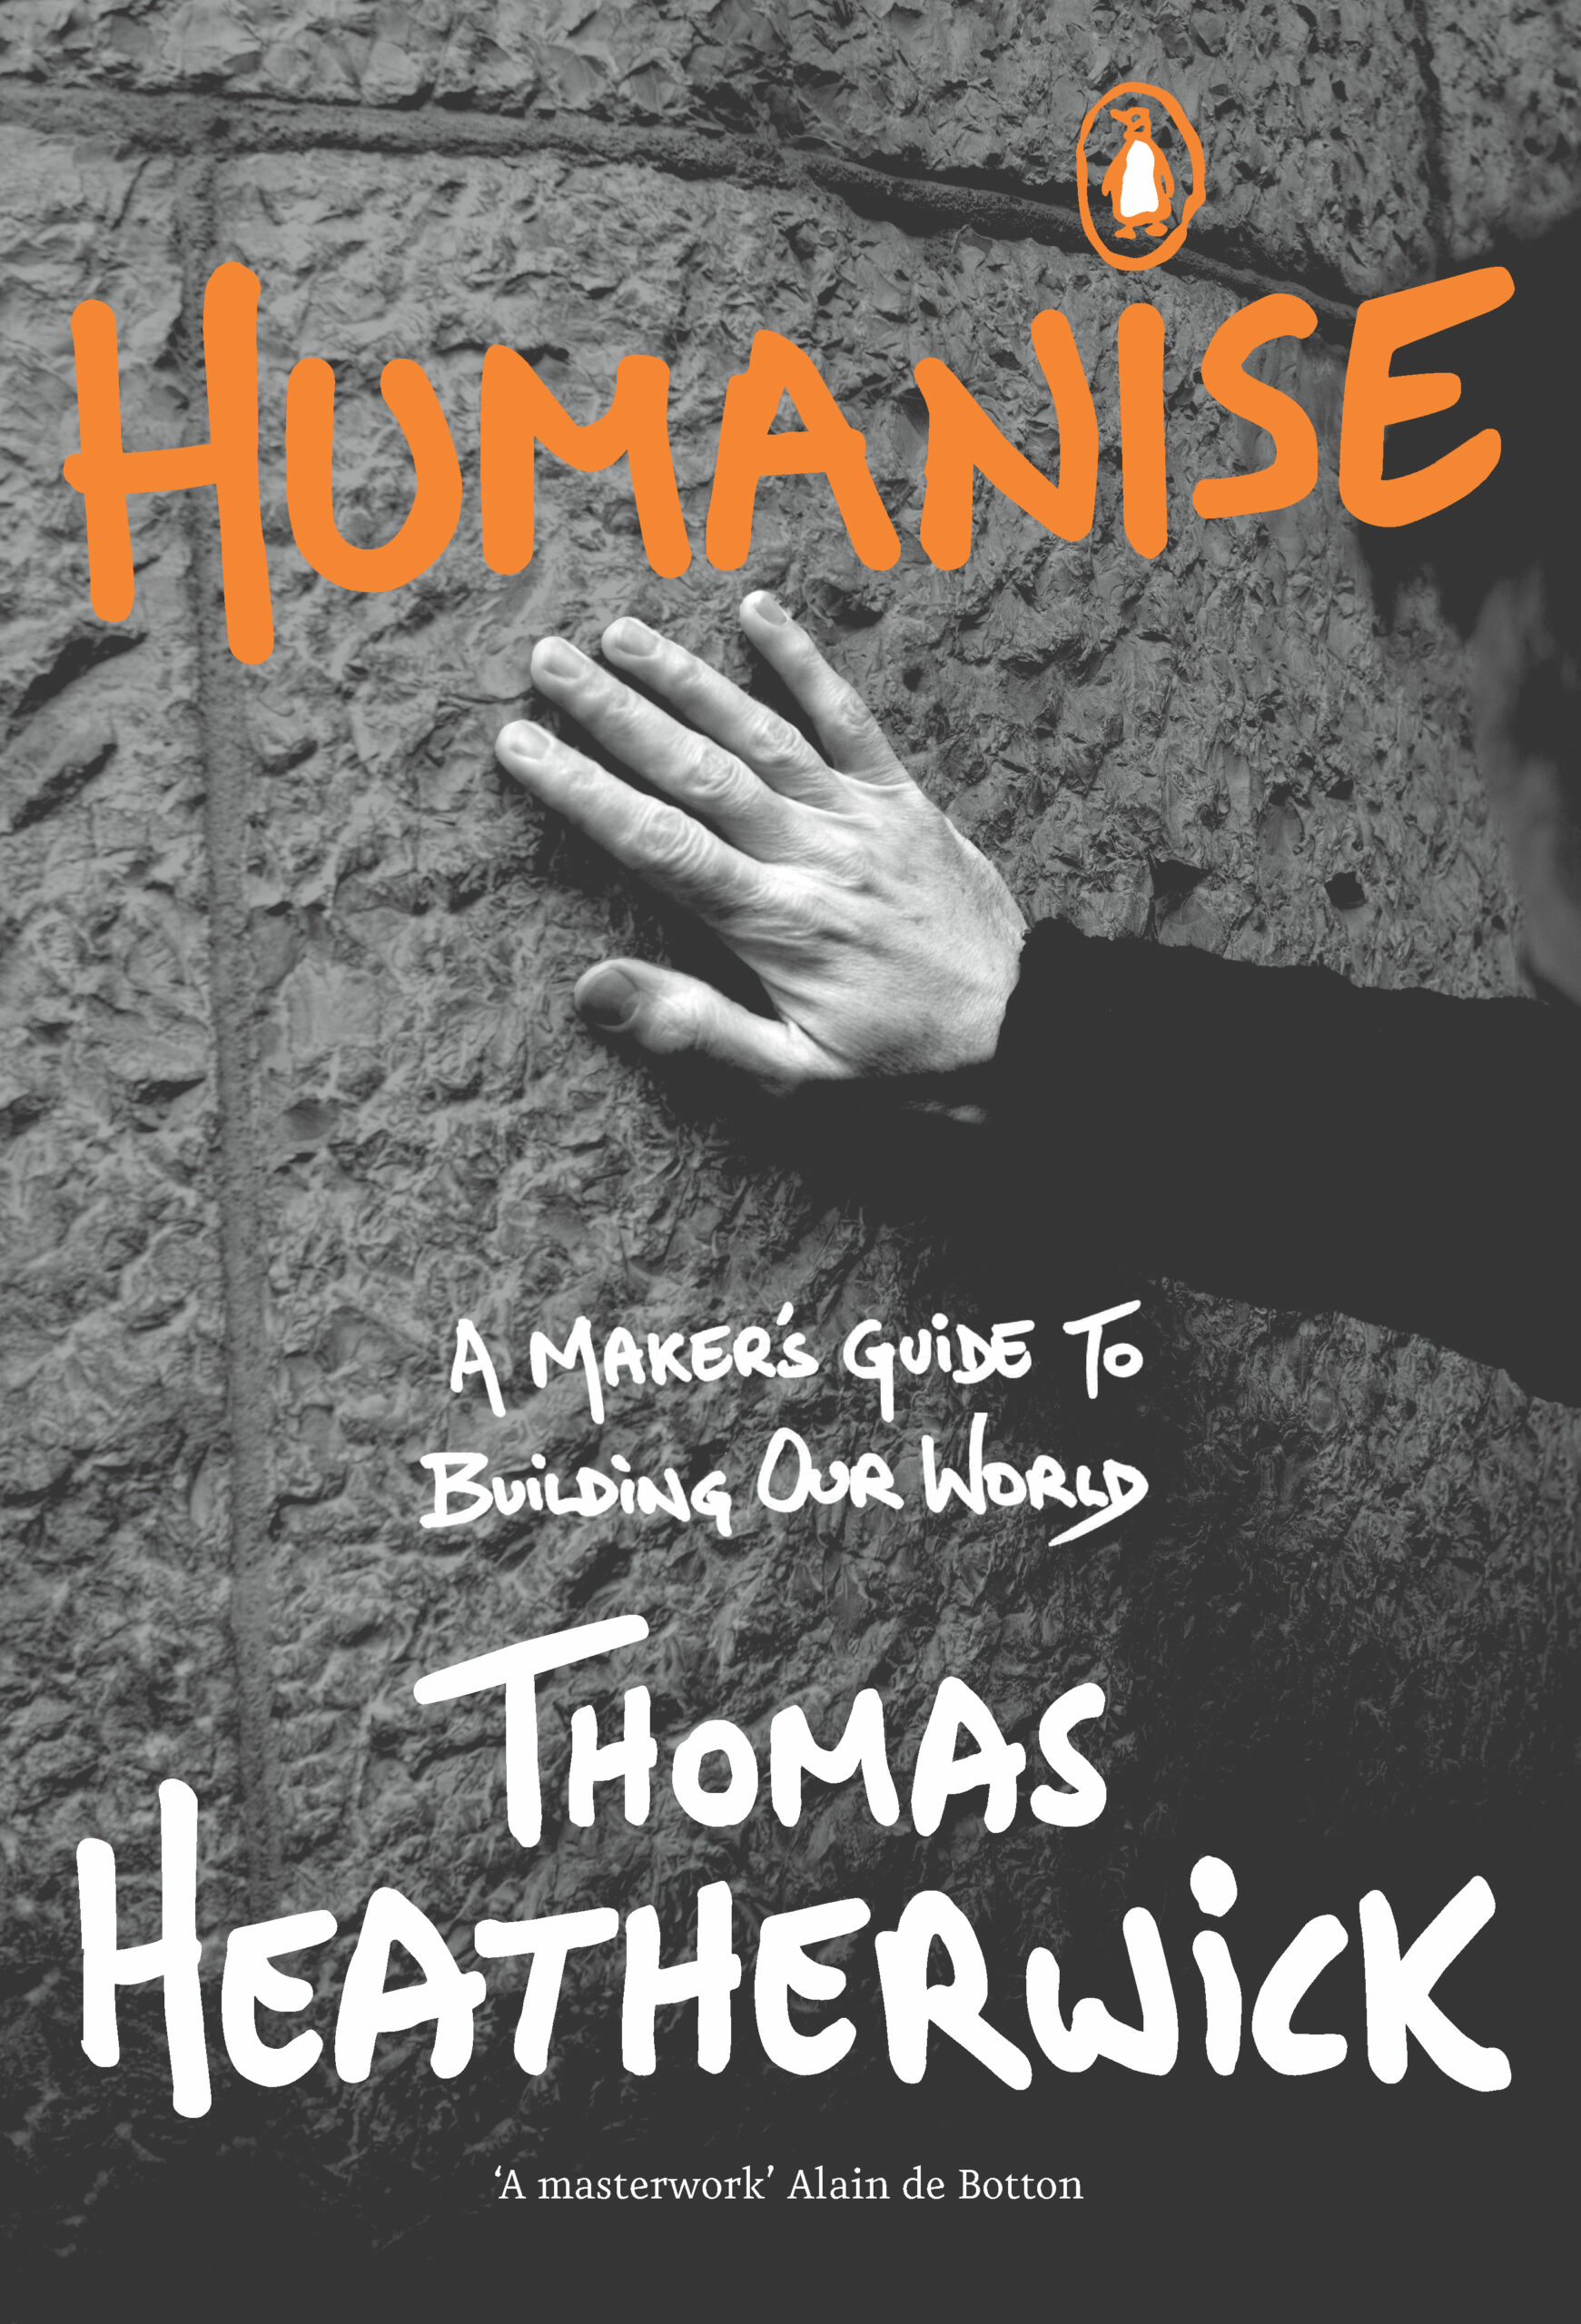 humanise cover scaled 1741x2560 acf cropped 1